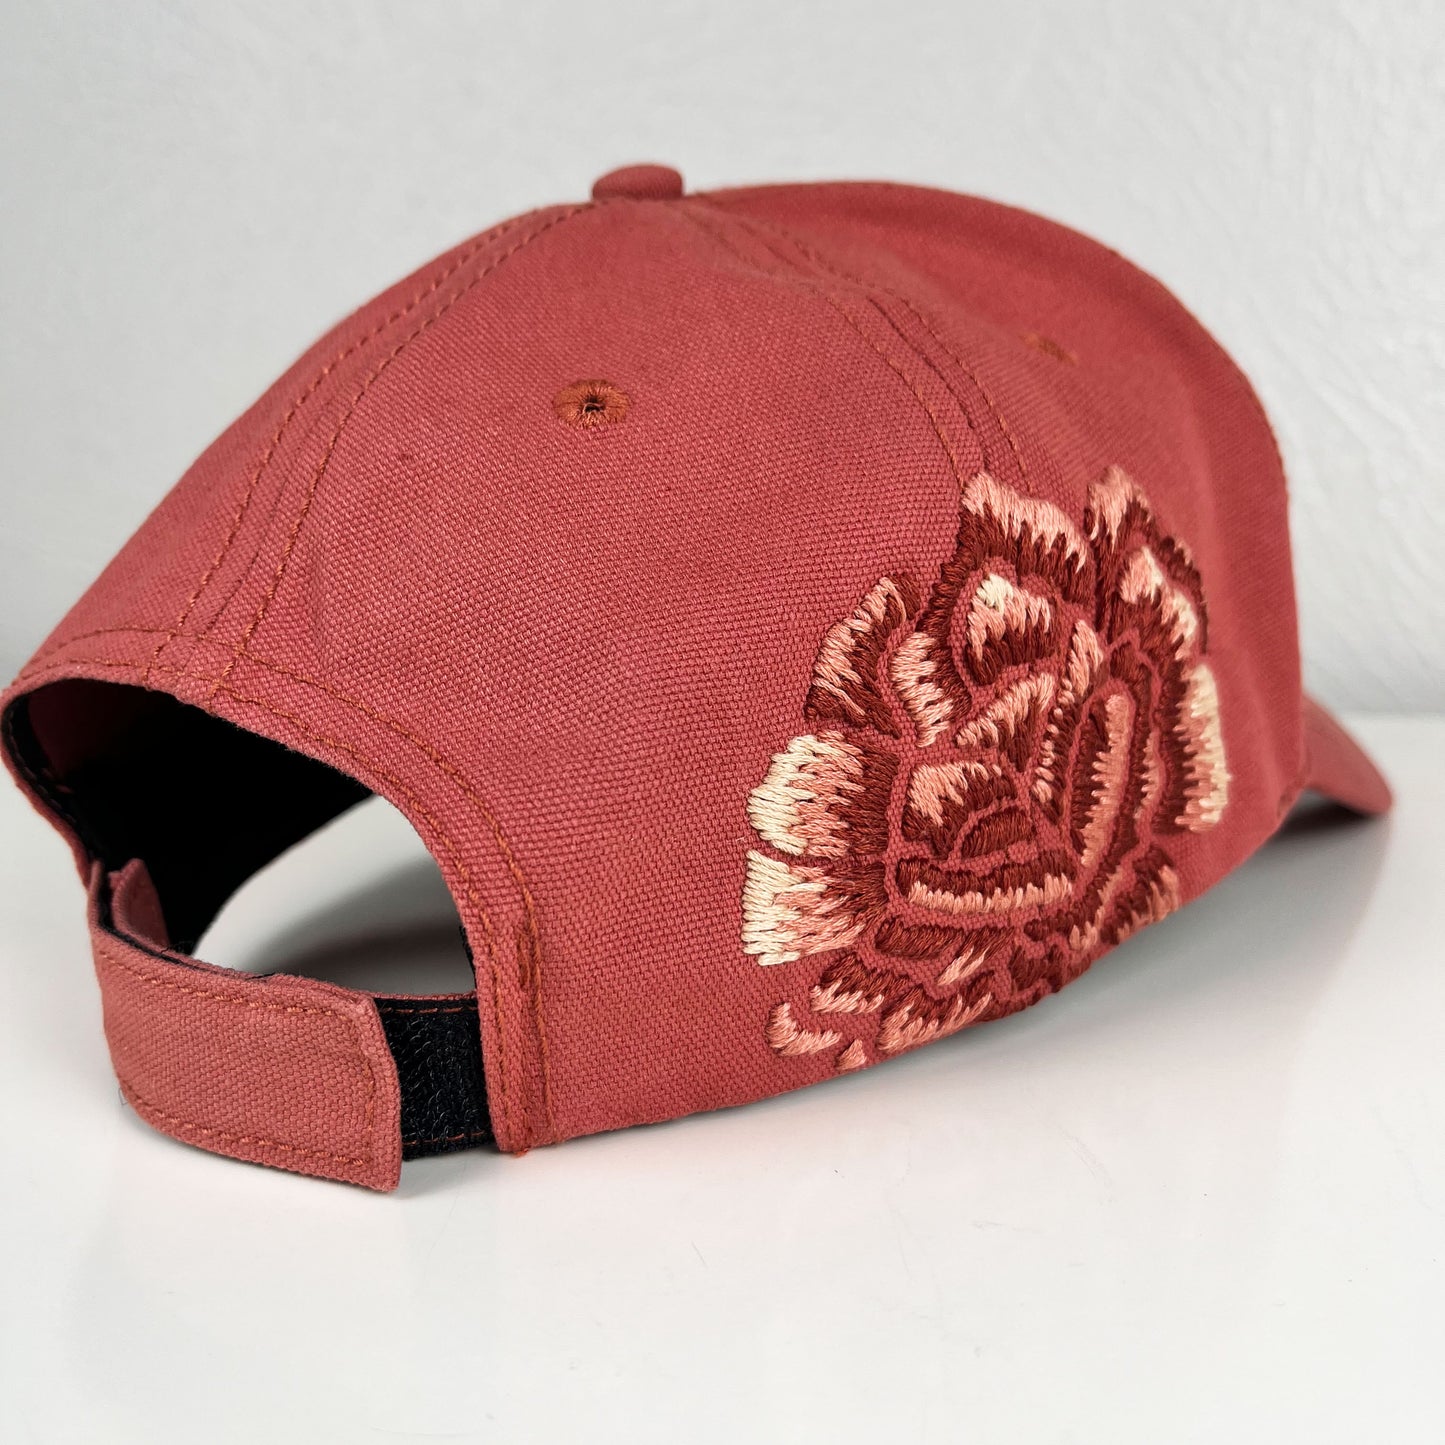 back angled view of a terra cotta colored baseball hat with a large hand embroidered peony on the side, also in shades of terra cotta